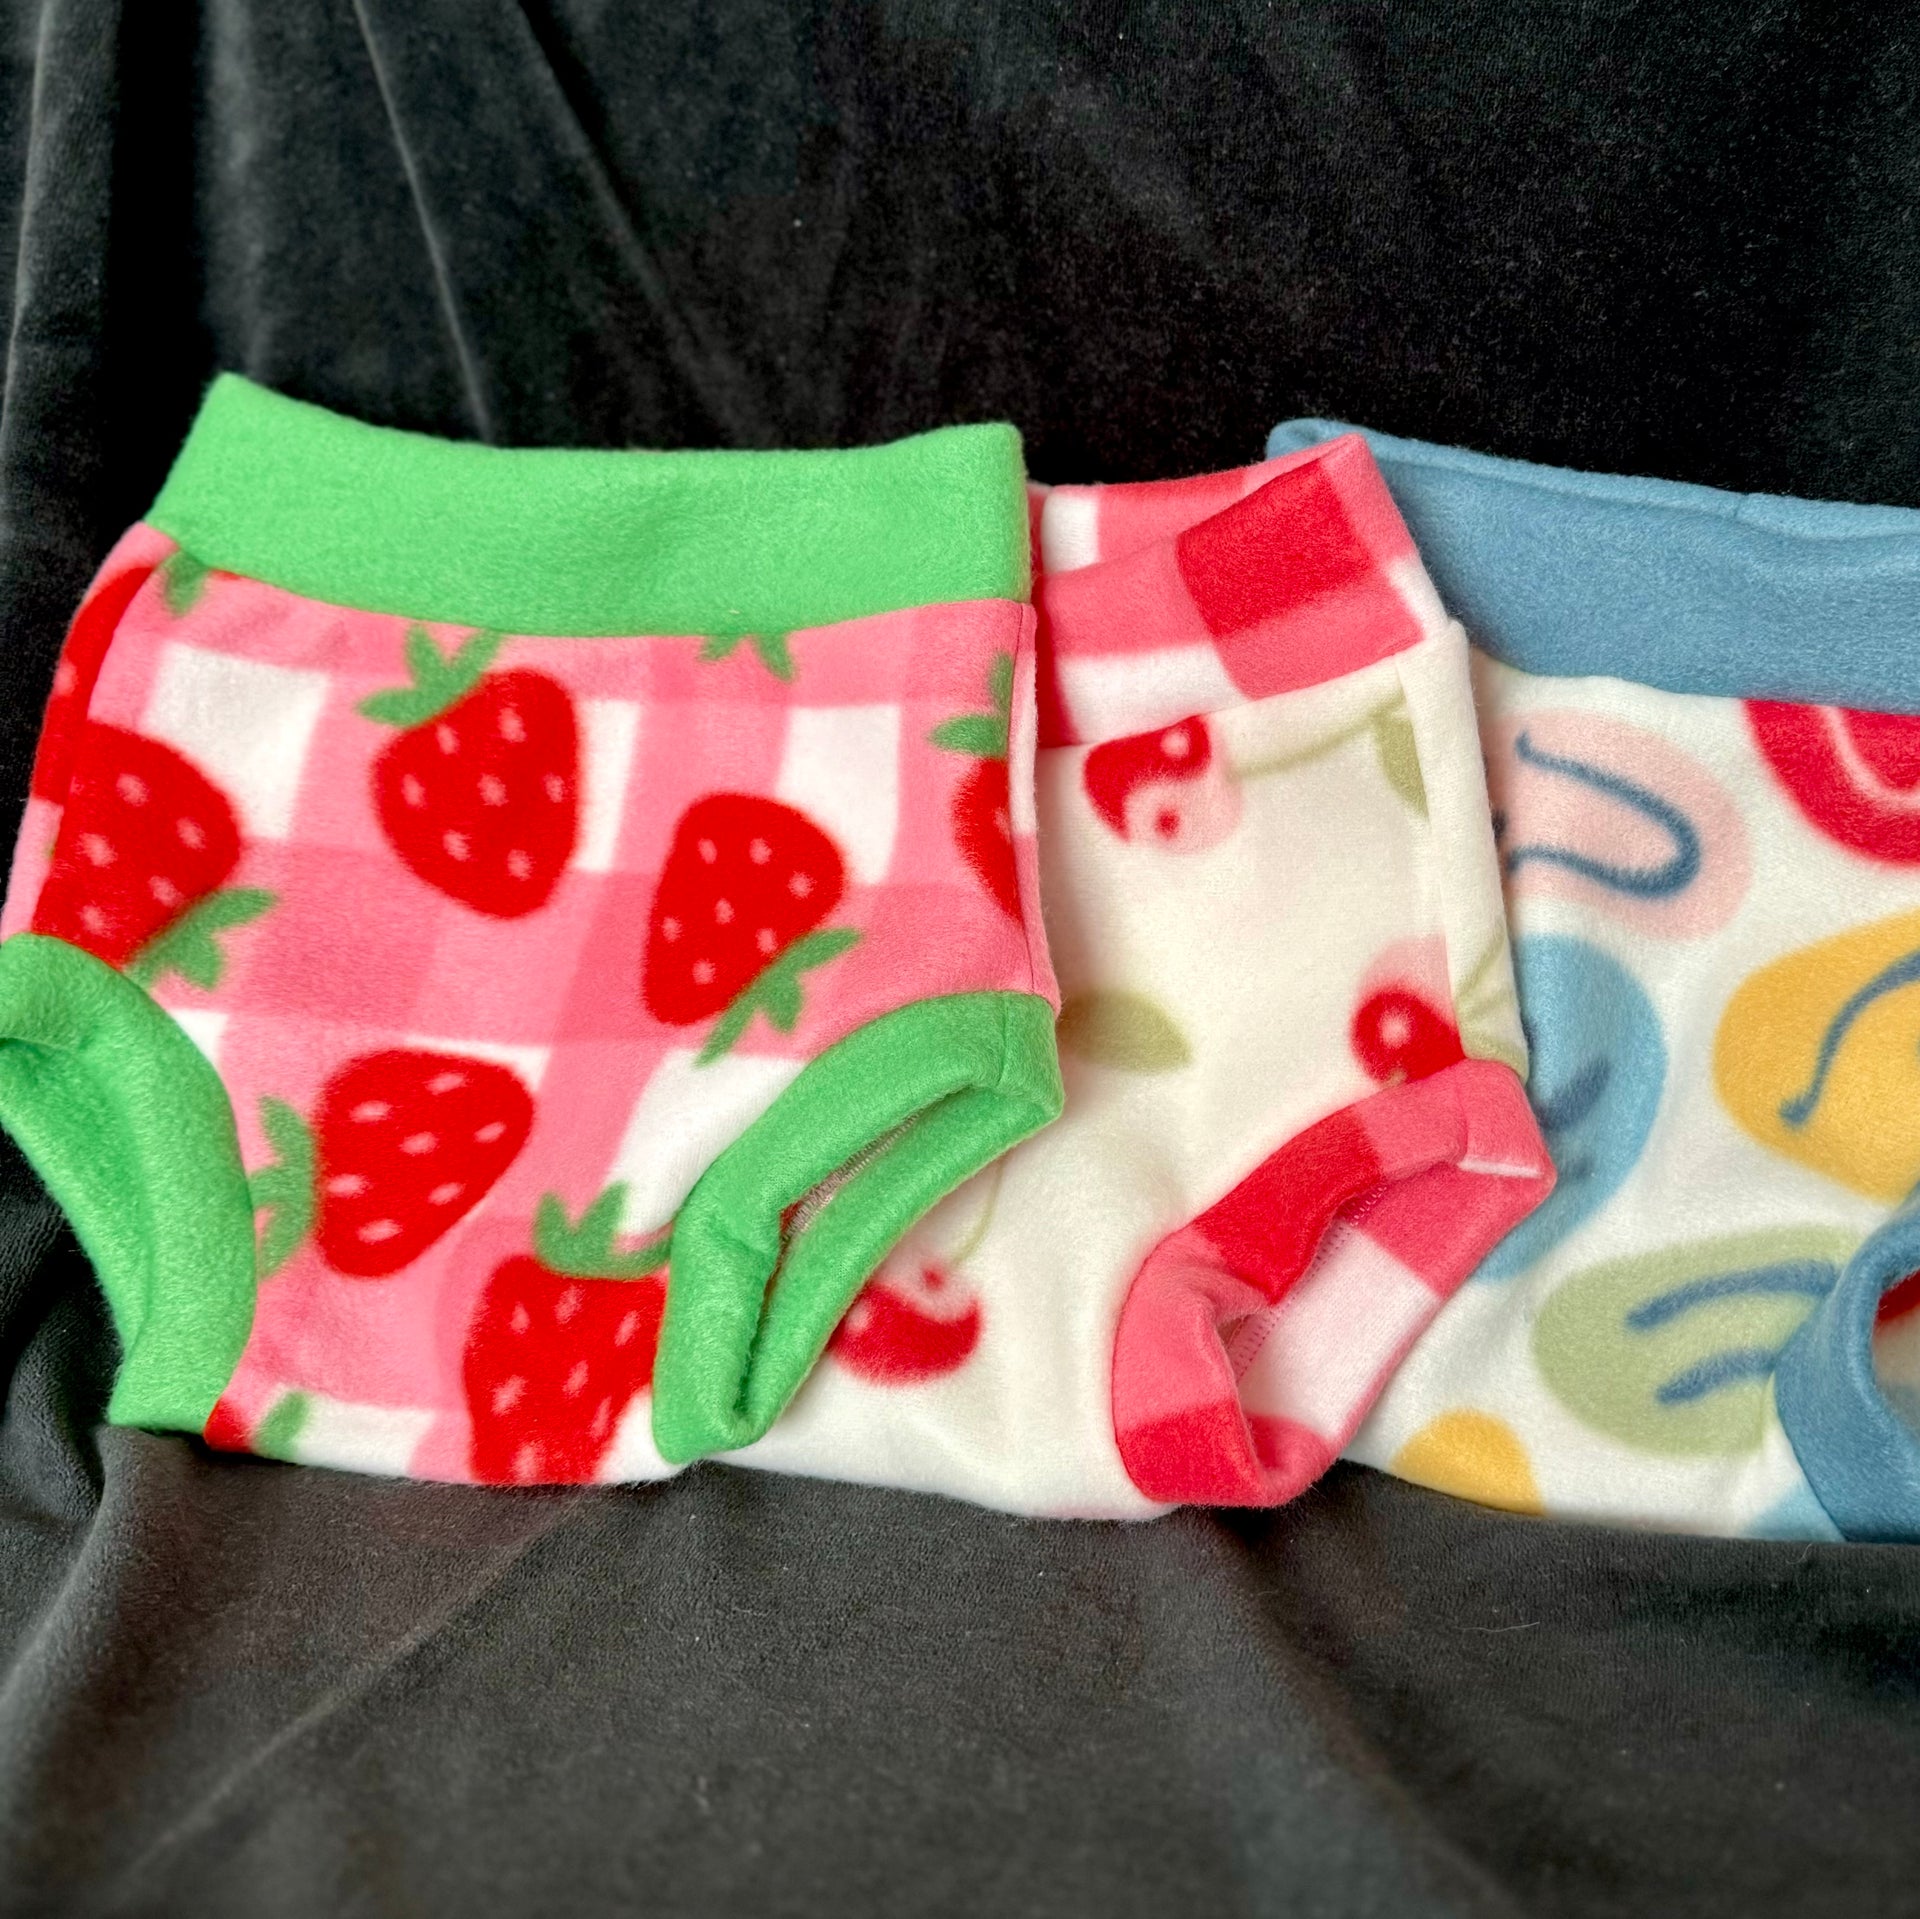 Rugcrafts by JesA Fleece Nappy Cover, Cloth and Carry